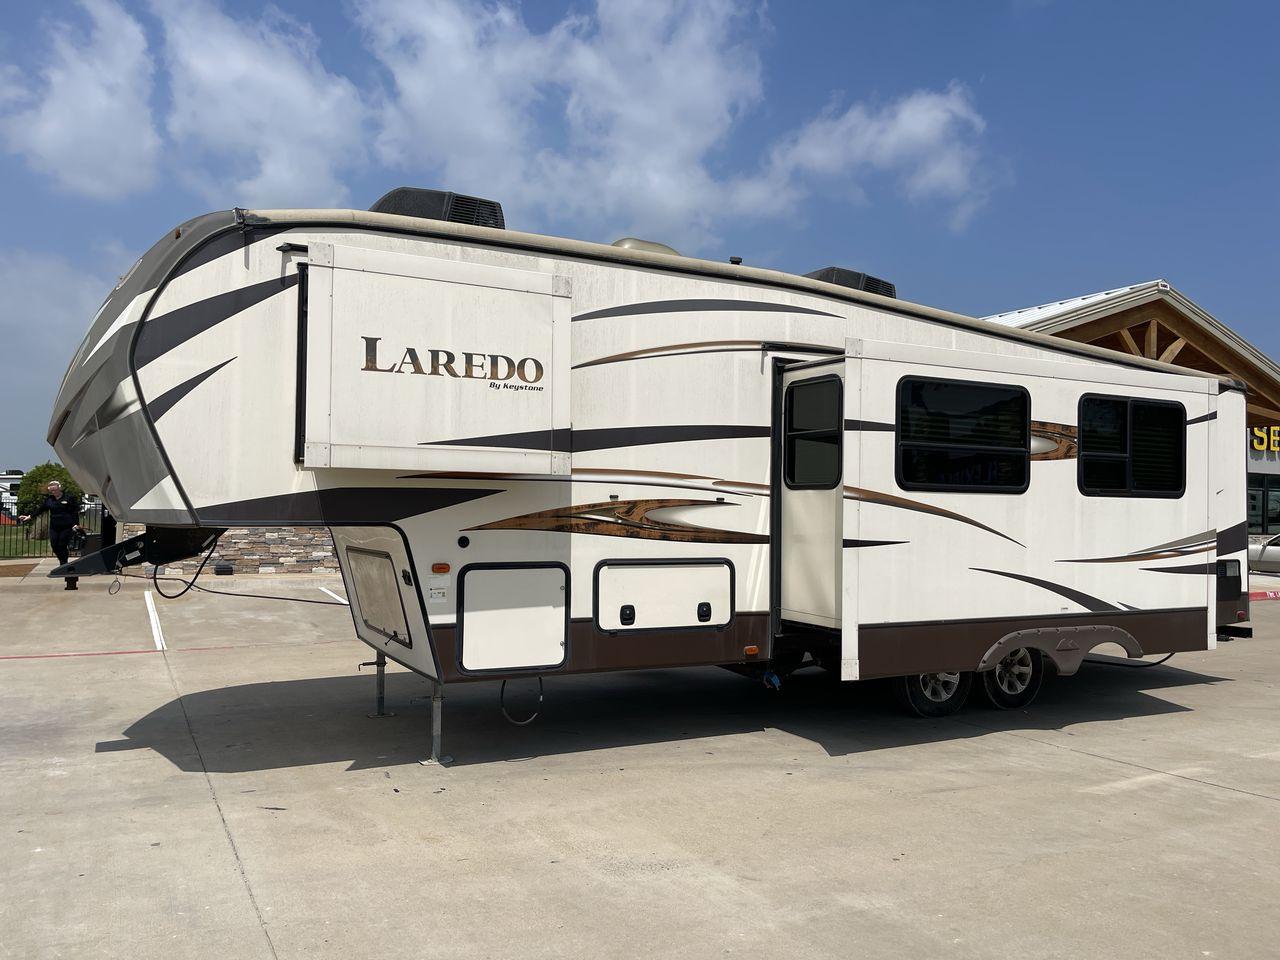 2015 WHITE KEYSTONE LAREDO 285SBH (4YDF28522FK) , Length: 33 ft. | Dry Weight: 7,880 lbs. | Gross Weight: 9,580 lbs. | Slides: 1 transmission, located at 4319 N Main Street, Cleburne, TX, 76033, (817) 221-0660, 32.435829, -97.384178 - This 2015 Keystone Fifth Wheel measures 33 feet long and 8 feet wide with a dry weight of 7,880 lbs. It has a GVWR of 9,580 lbs and a hitch weight of 1,465 lbs. This model also comes with automatic heating and cooling rated at 30,000 and 13,500 BTUs respectively. The exterior of this unit is a base - Photo #25